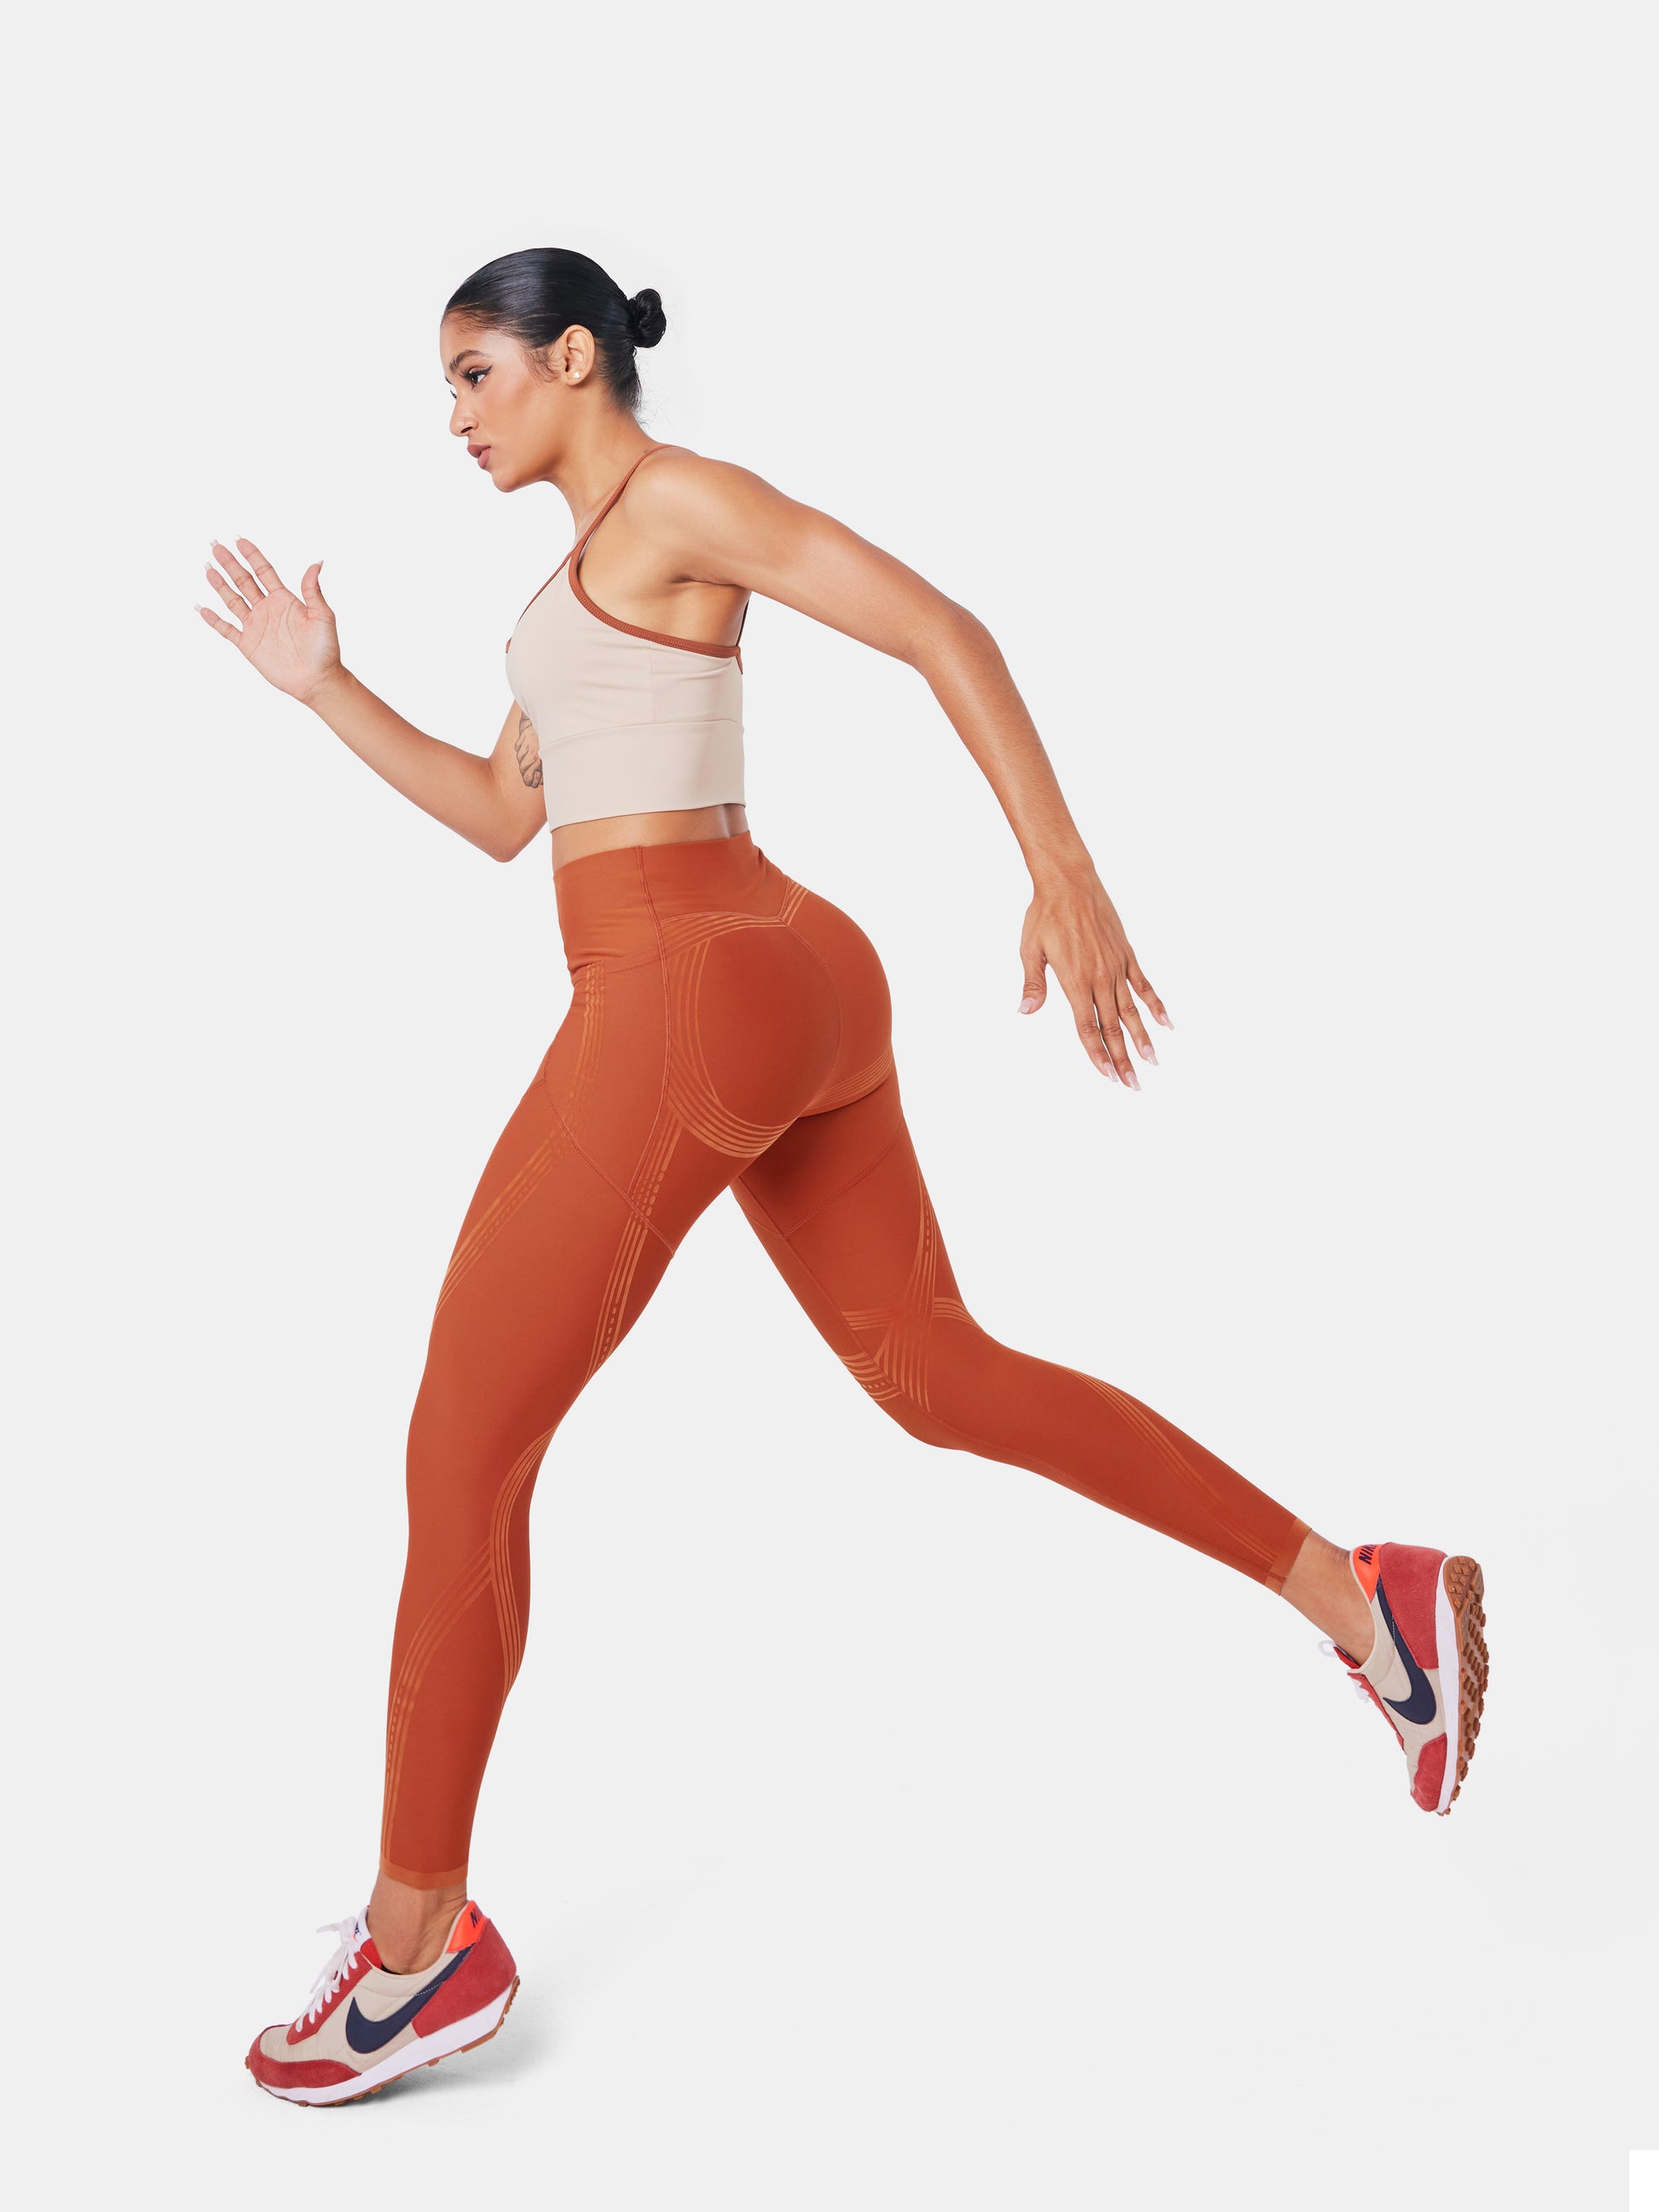 These 2-IN-1 Body Sculpt Leggings from @Fanka are AMAZING! 10/10